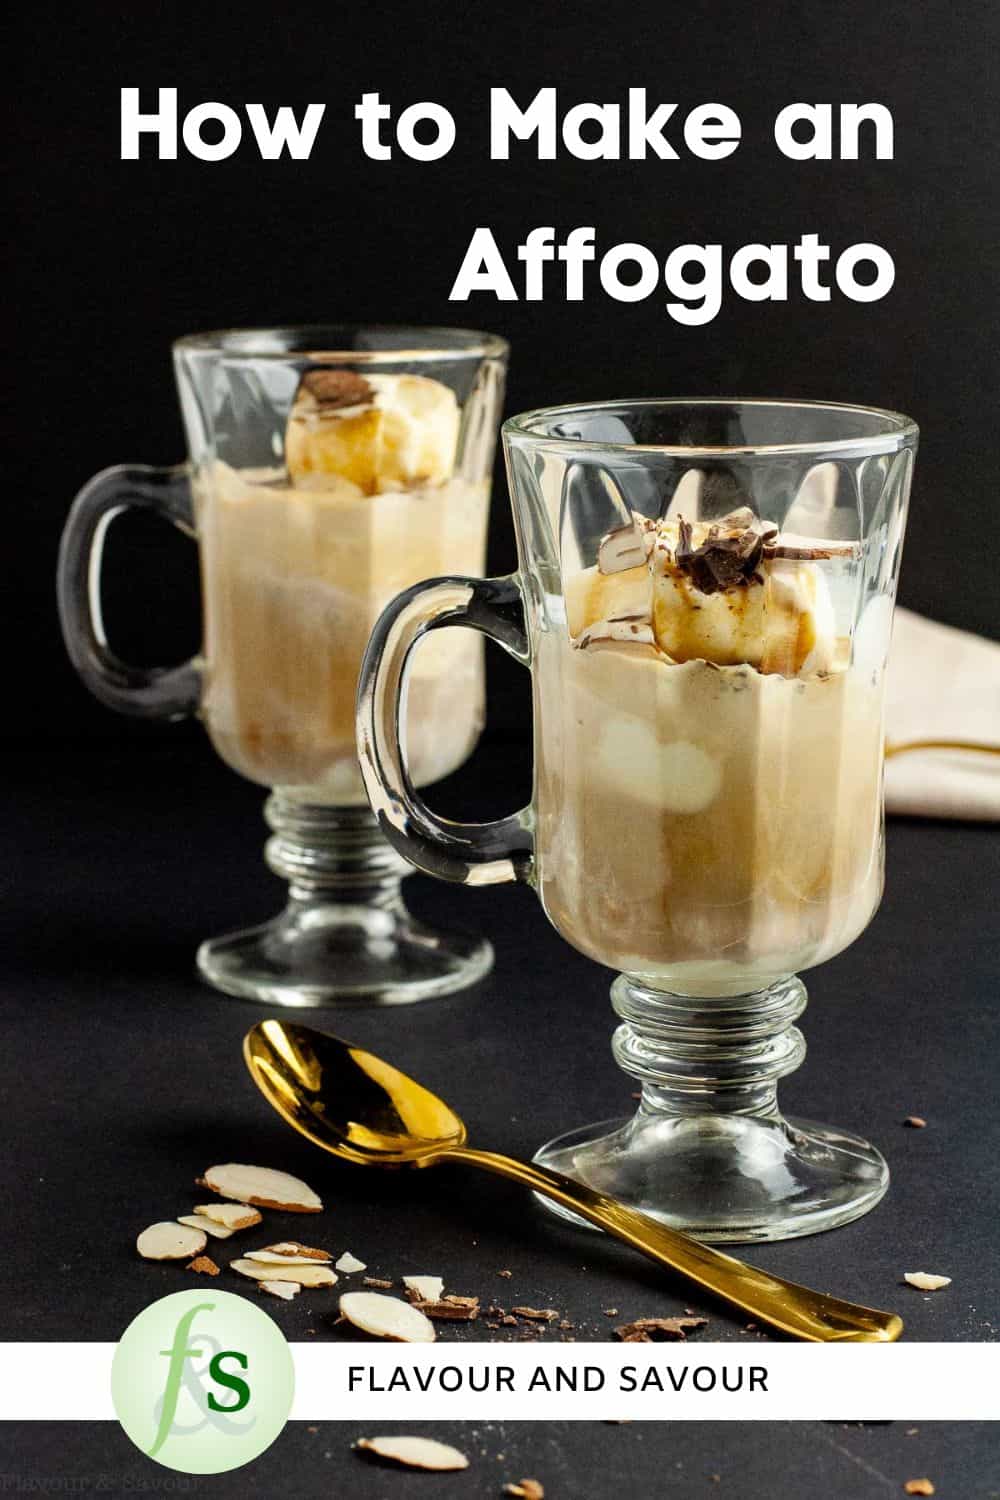 Image with text overlay for How to Make an Affogato.